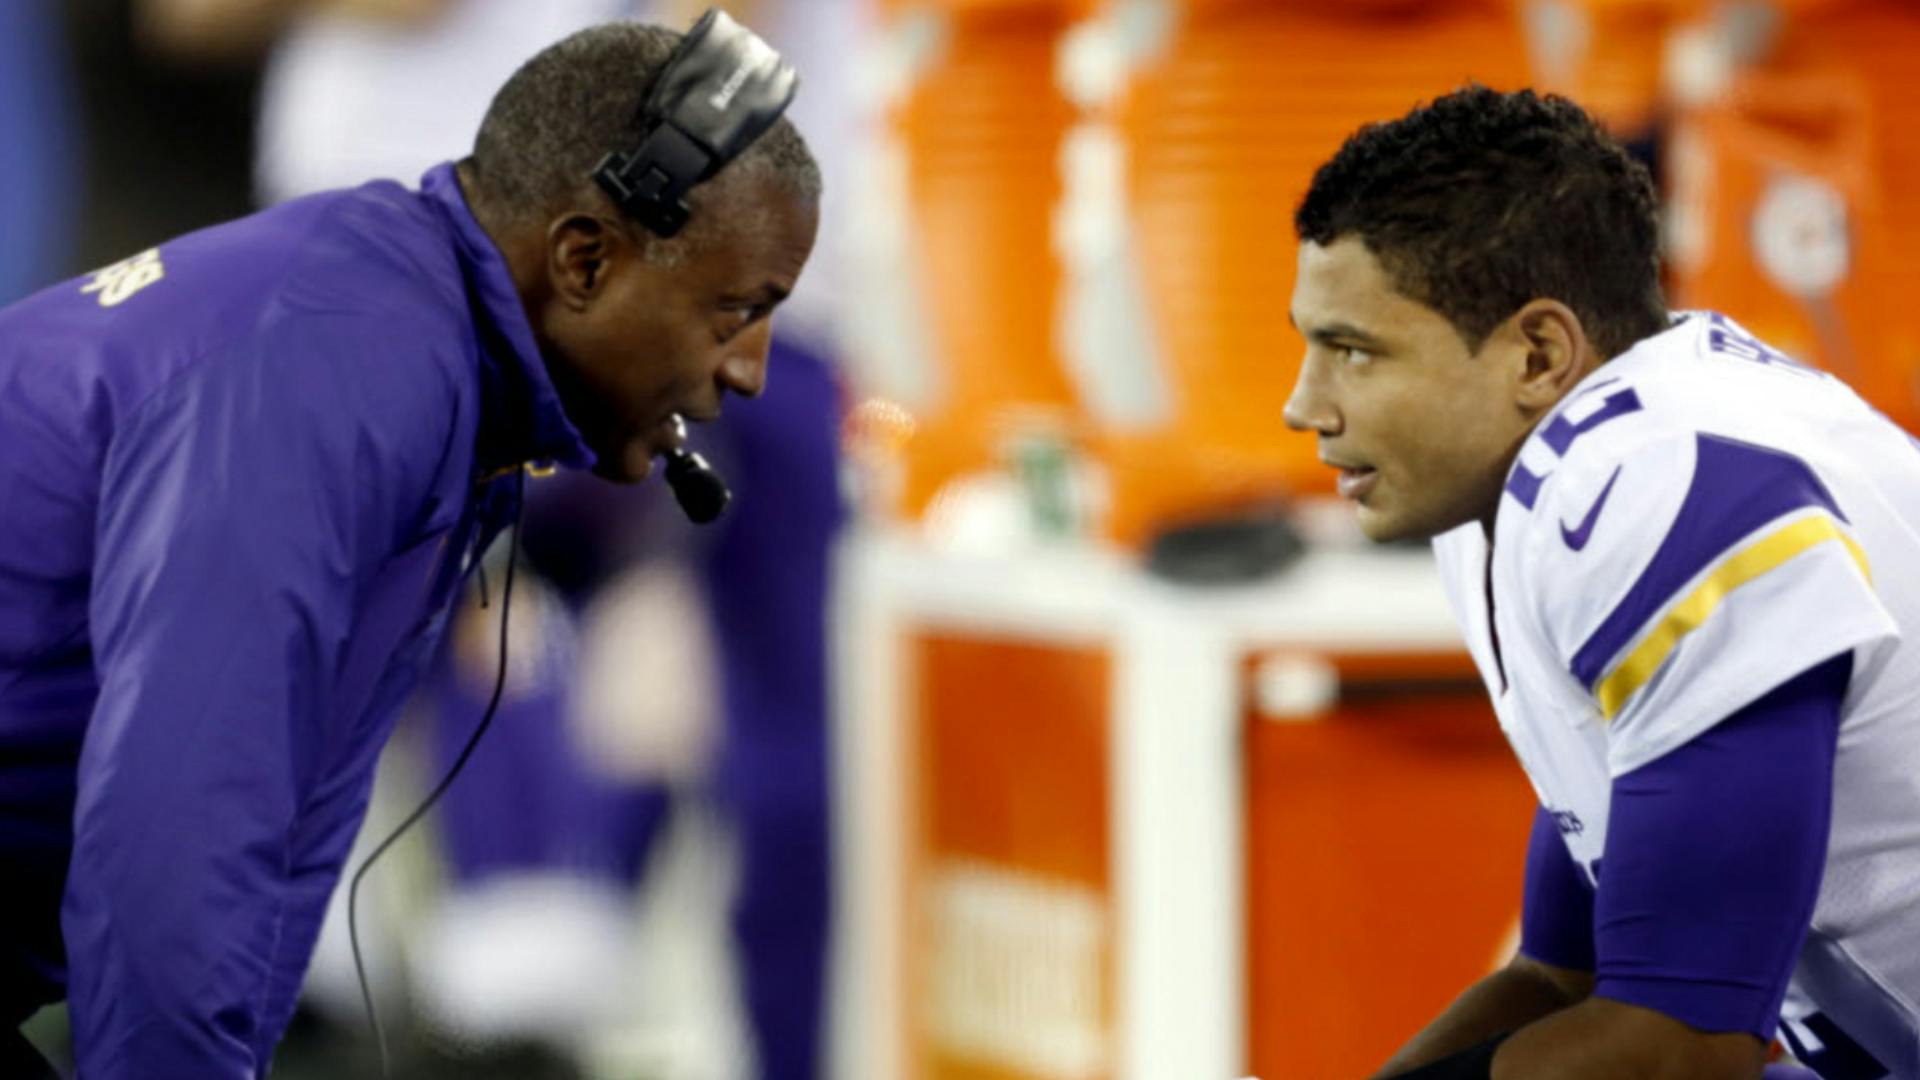 Vikings quarterback Josh Freeman and head coach Leslie Frazier talked about the team's 23-7 loss to the New York Giants.